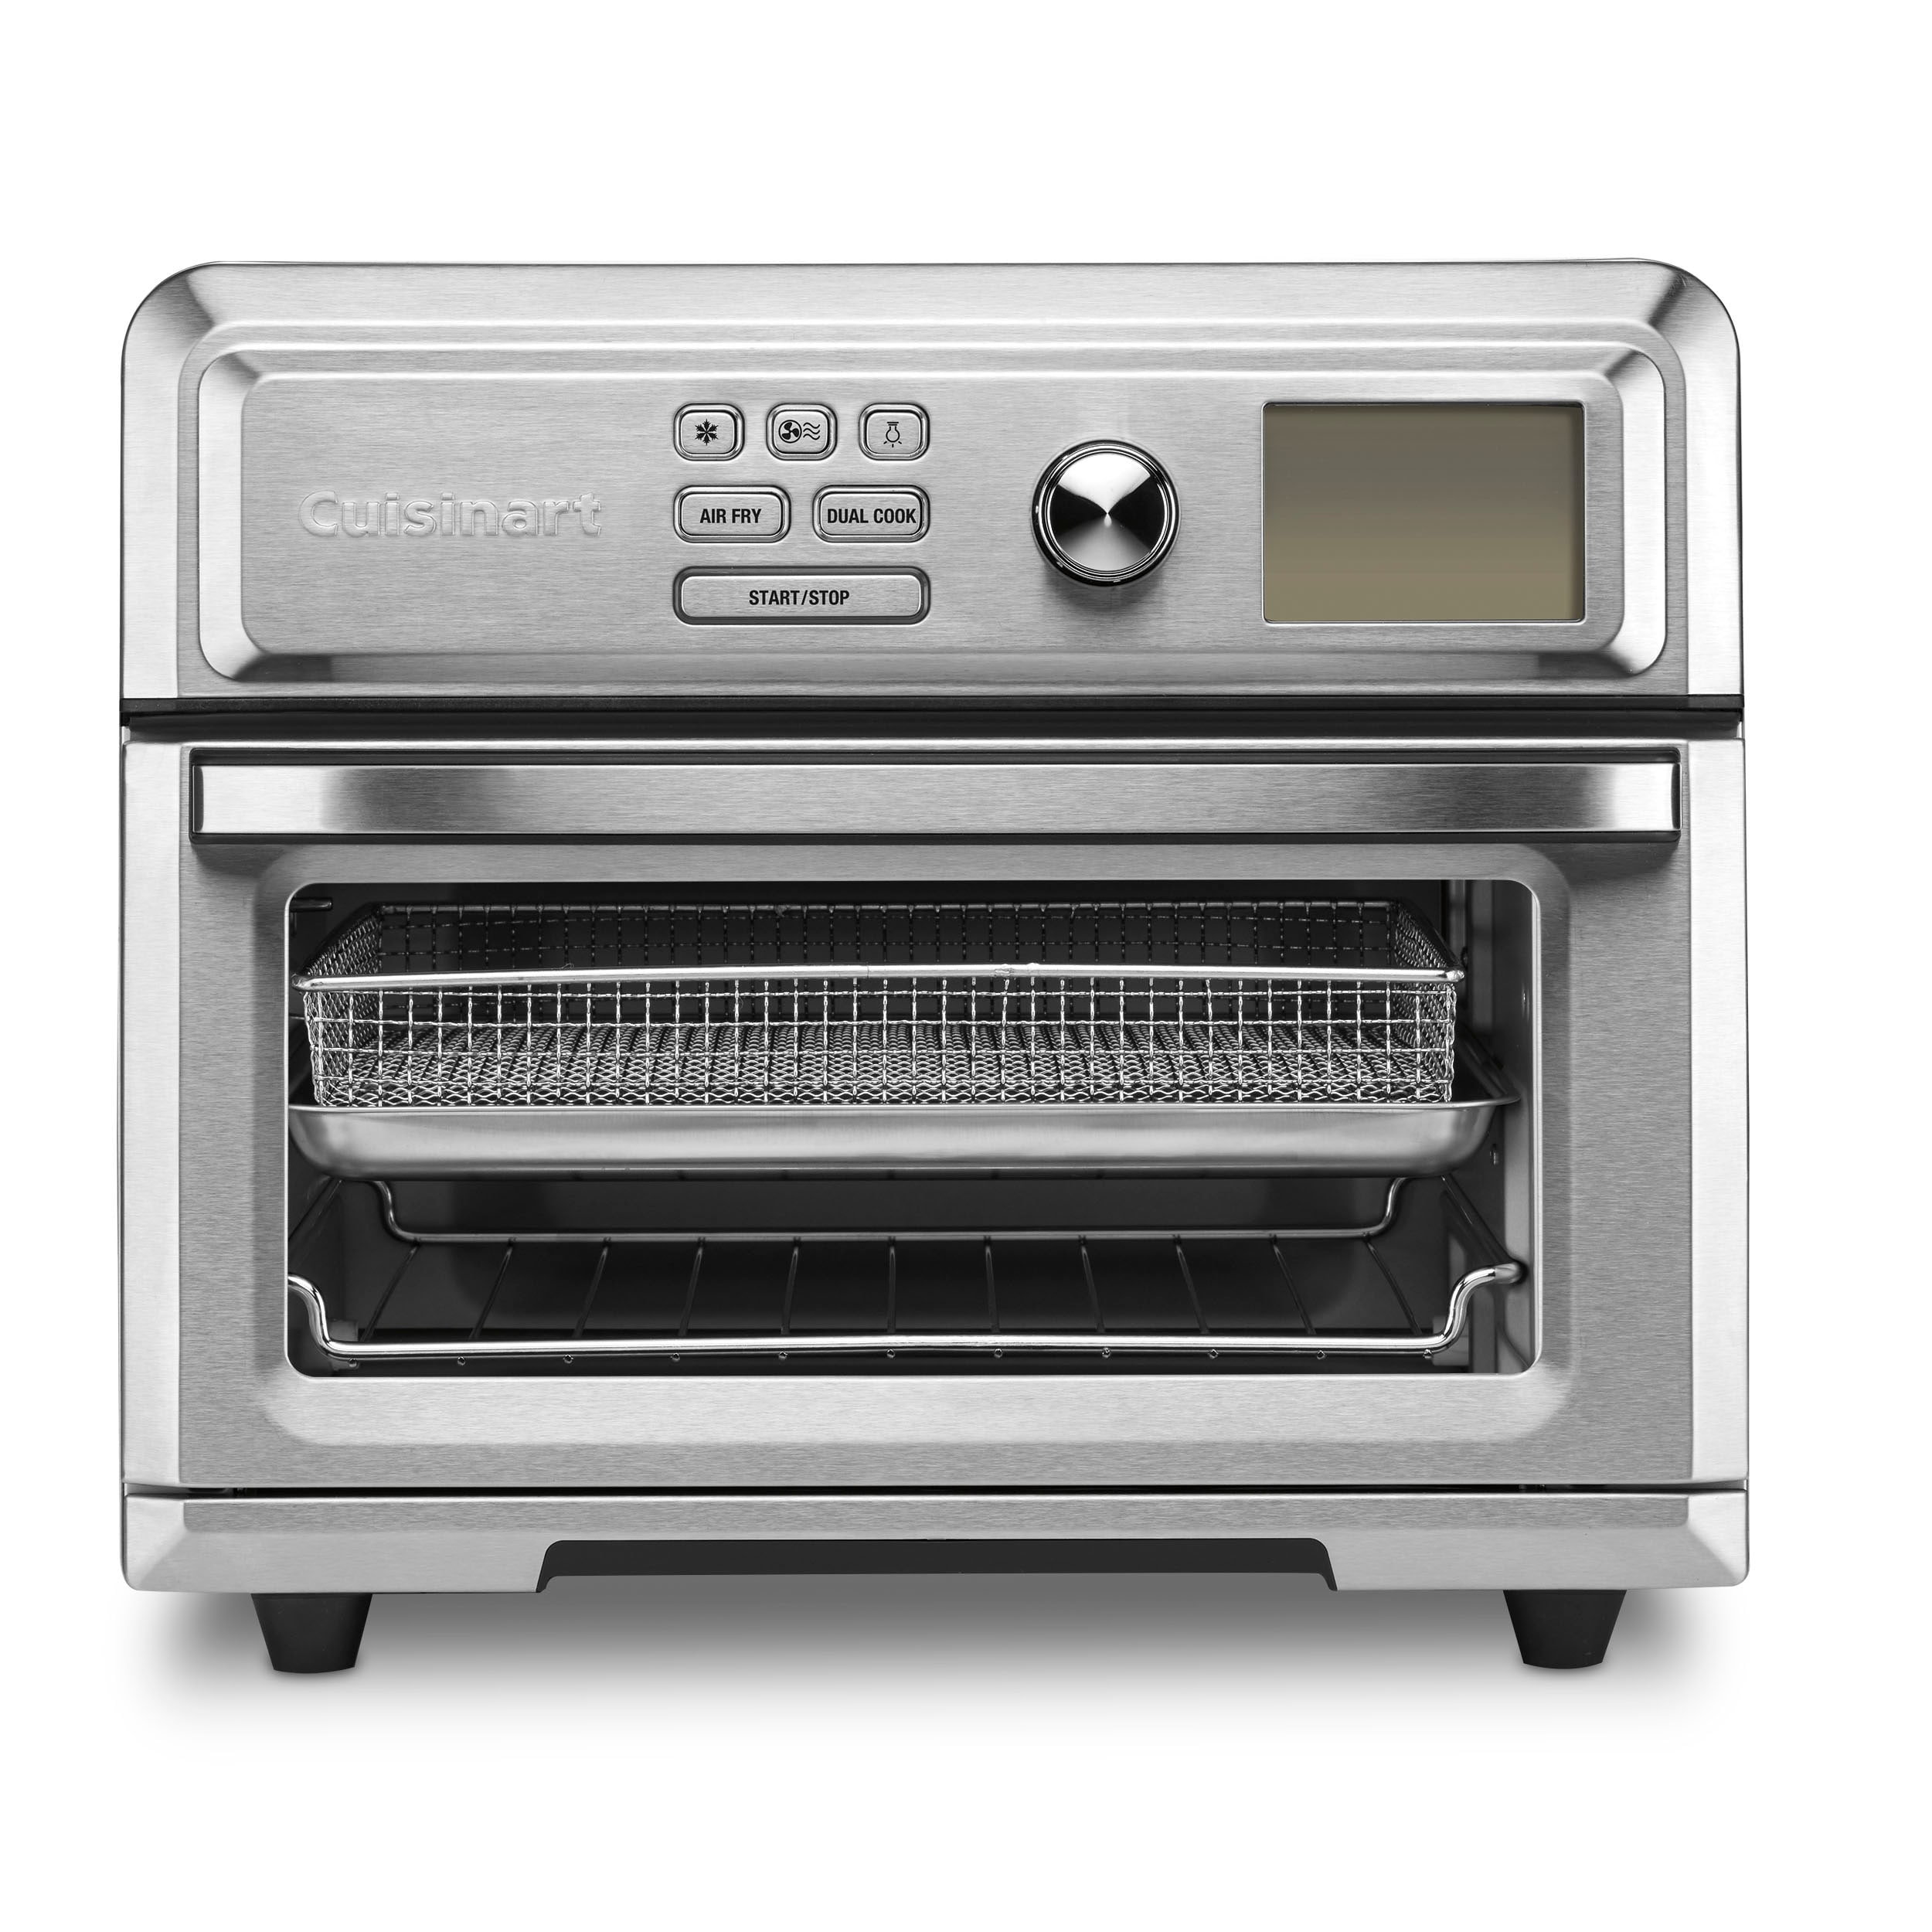 Air Fryer Toaster Oven Combo, 6 Slice, Stainless Steel, 1700W, ETL Listed  oven